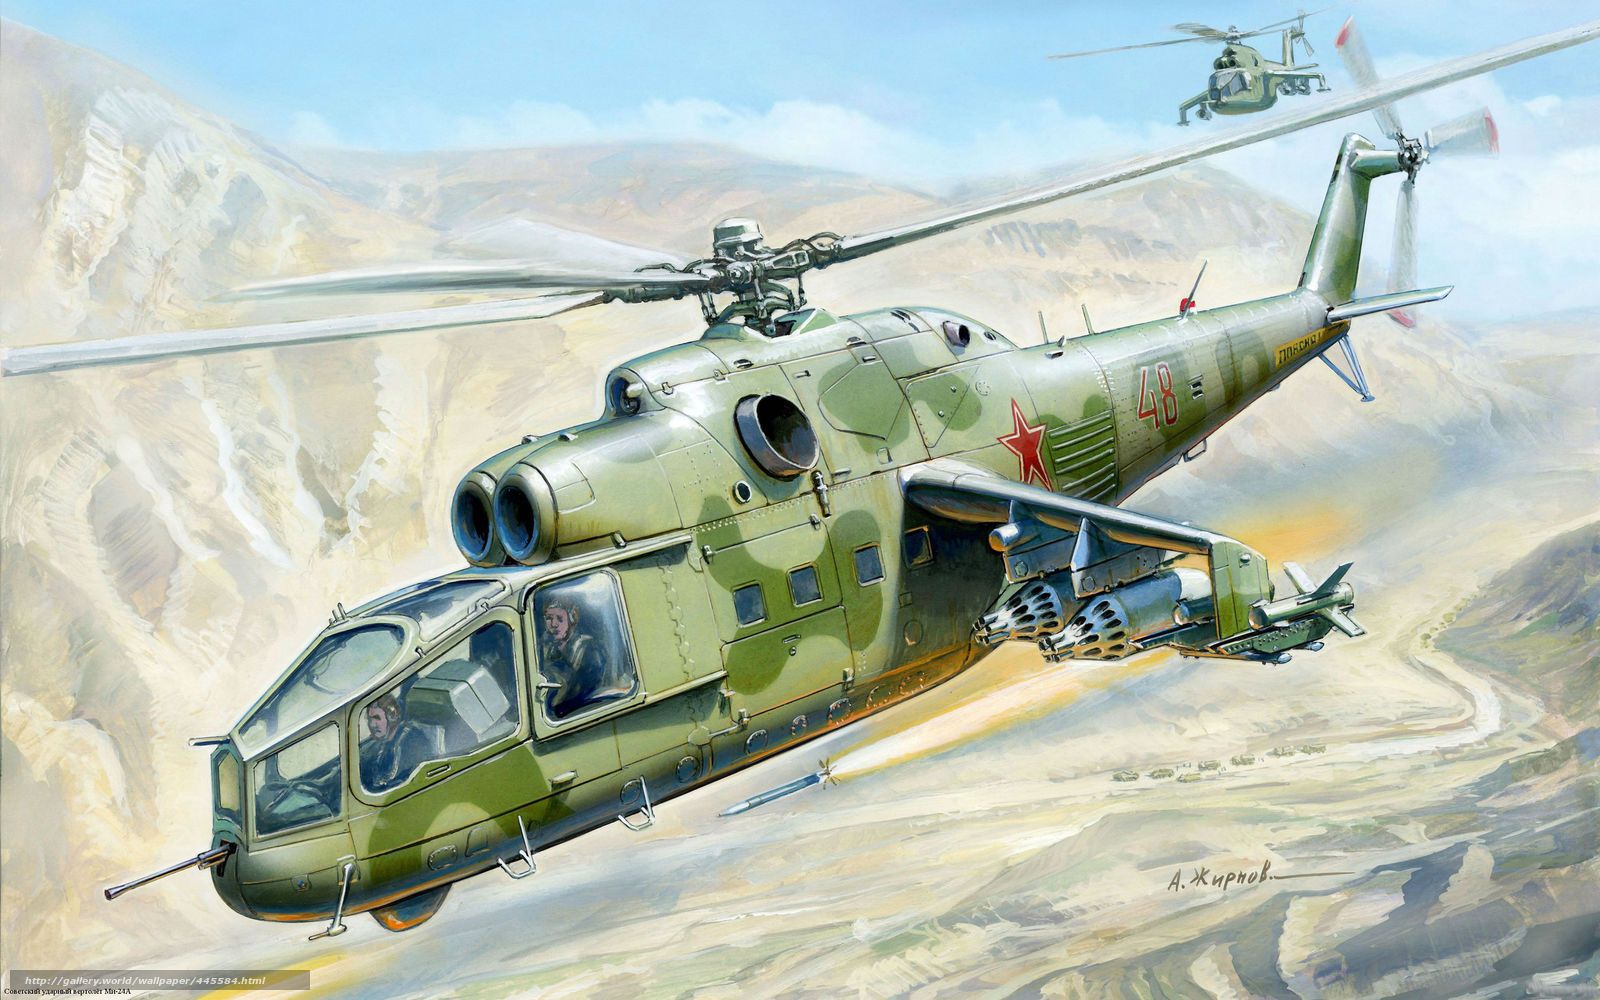 Download wallpaper Soviet, helicopter, aviation, missile free desktop wallpaper in the resolution 3840x2400